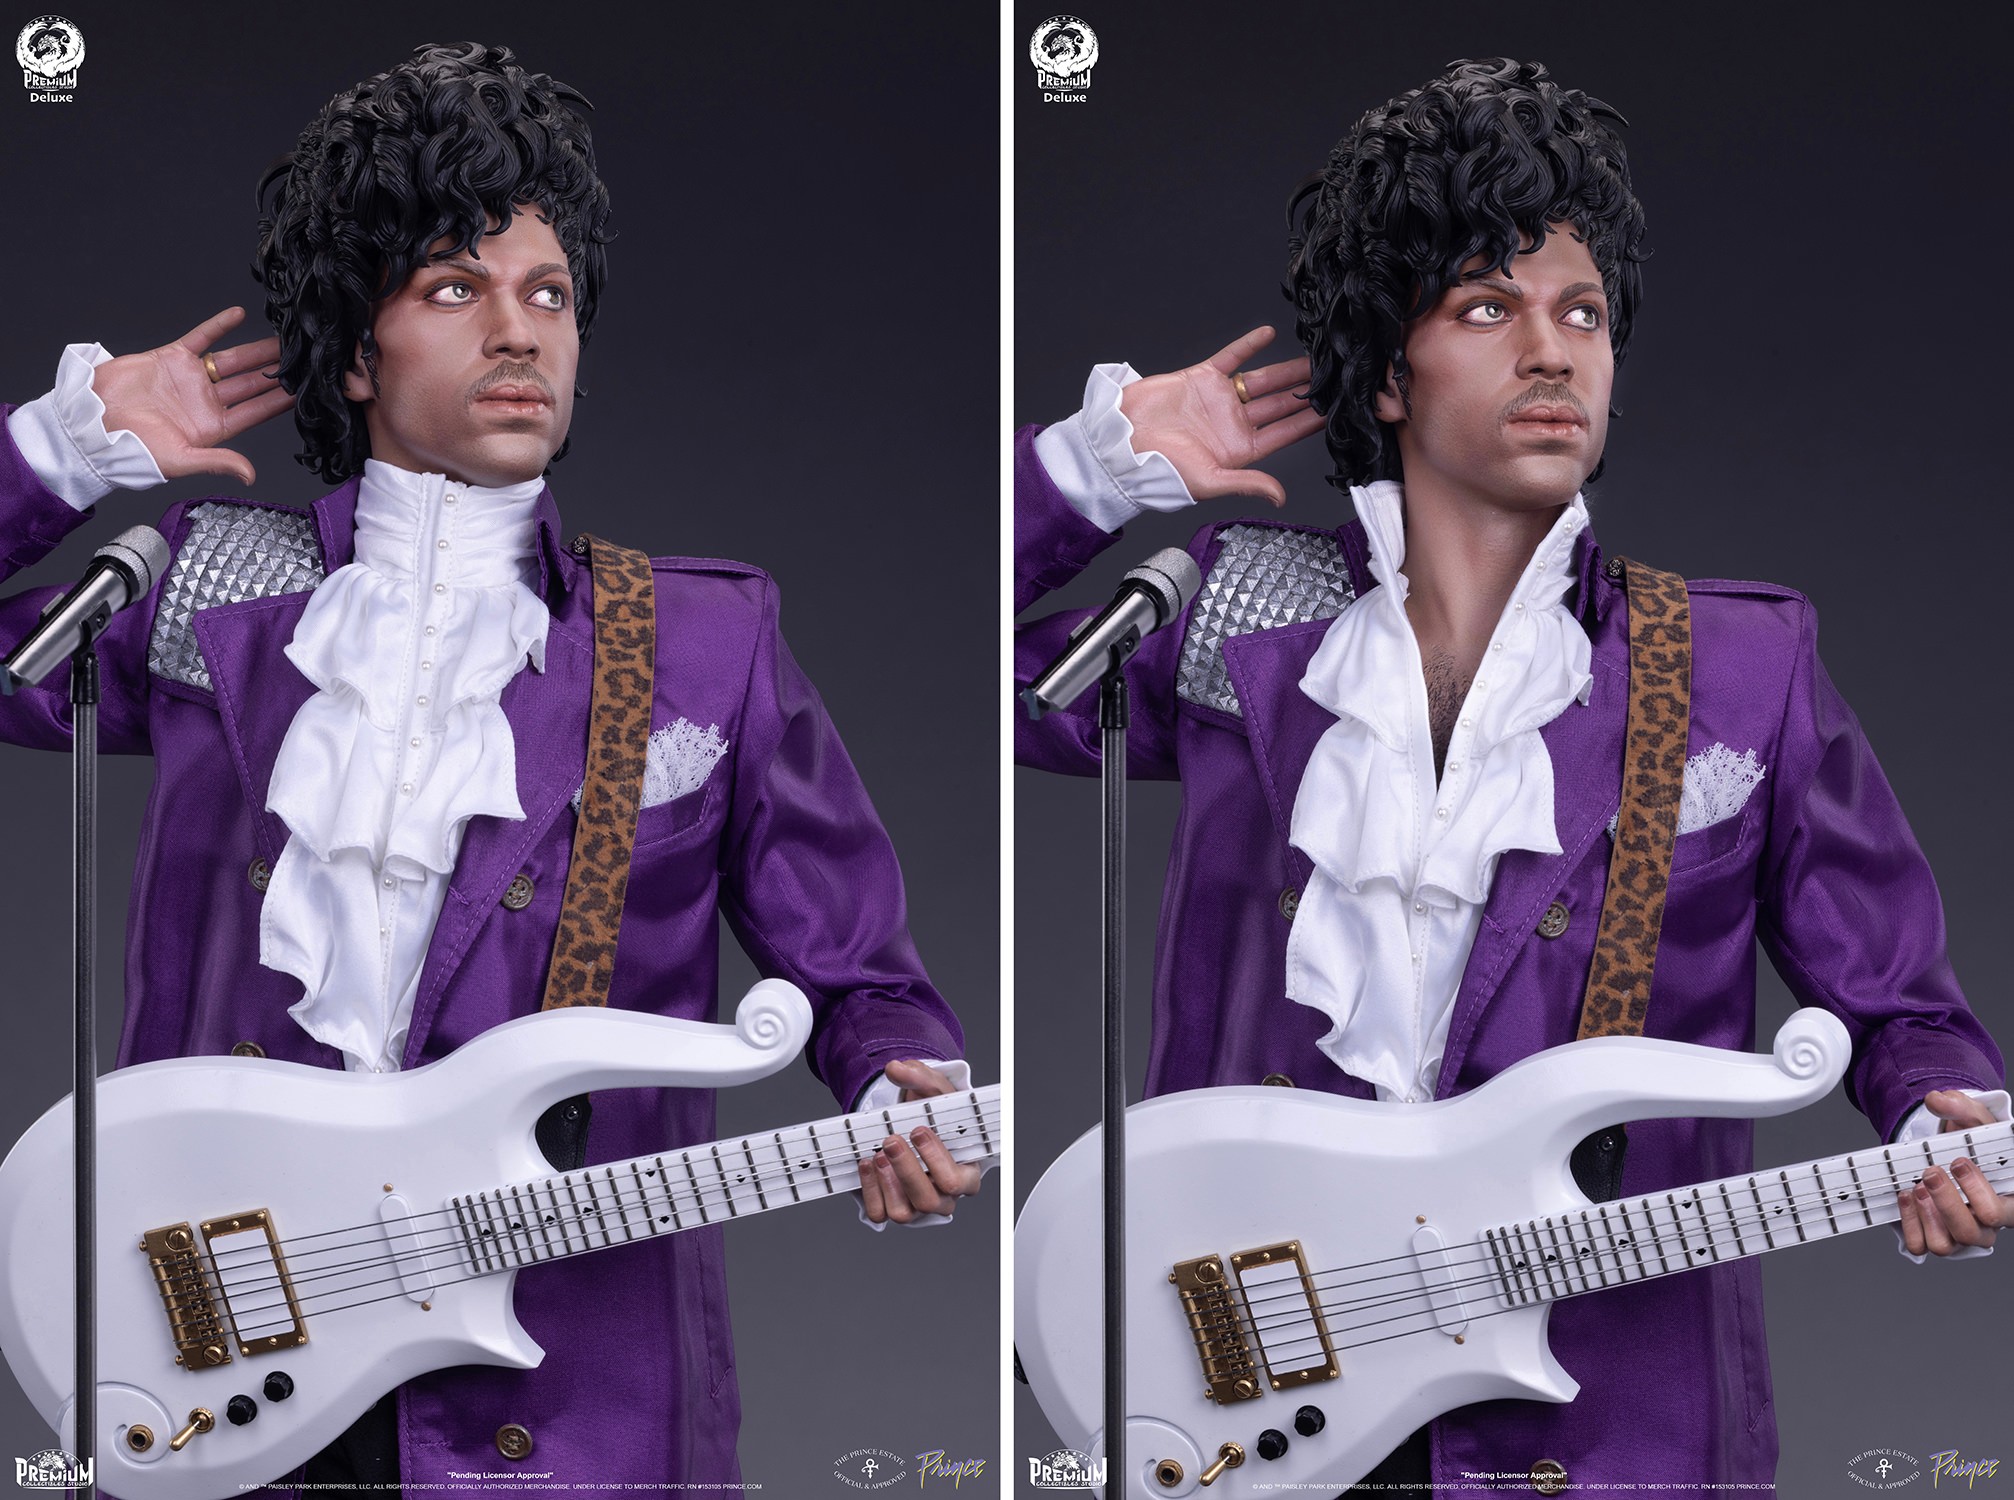 Prince (Deluxe Version)